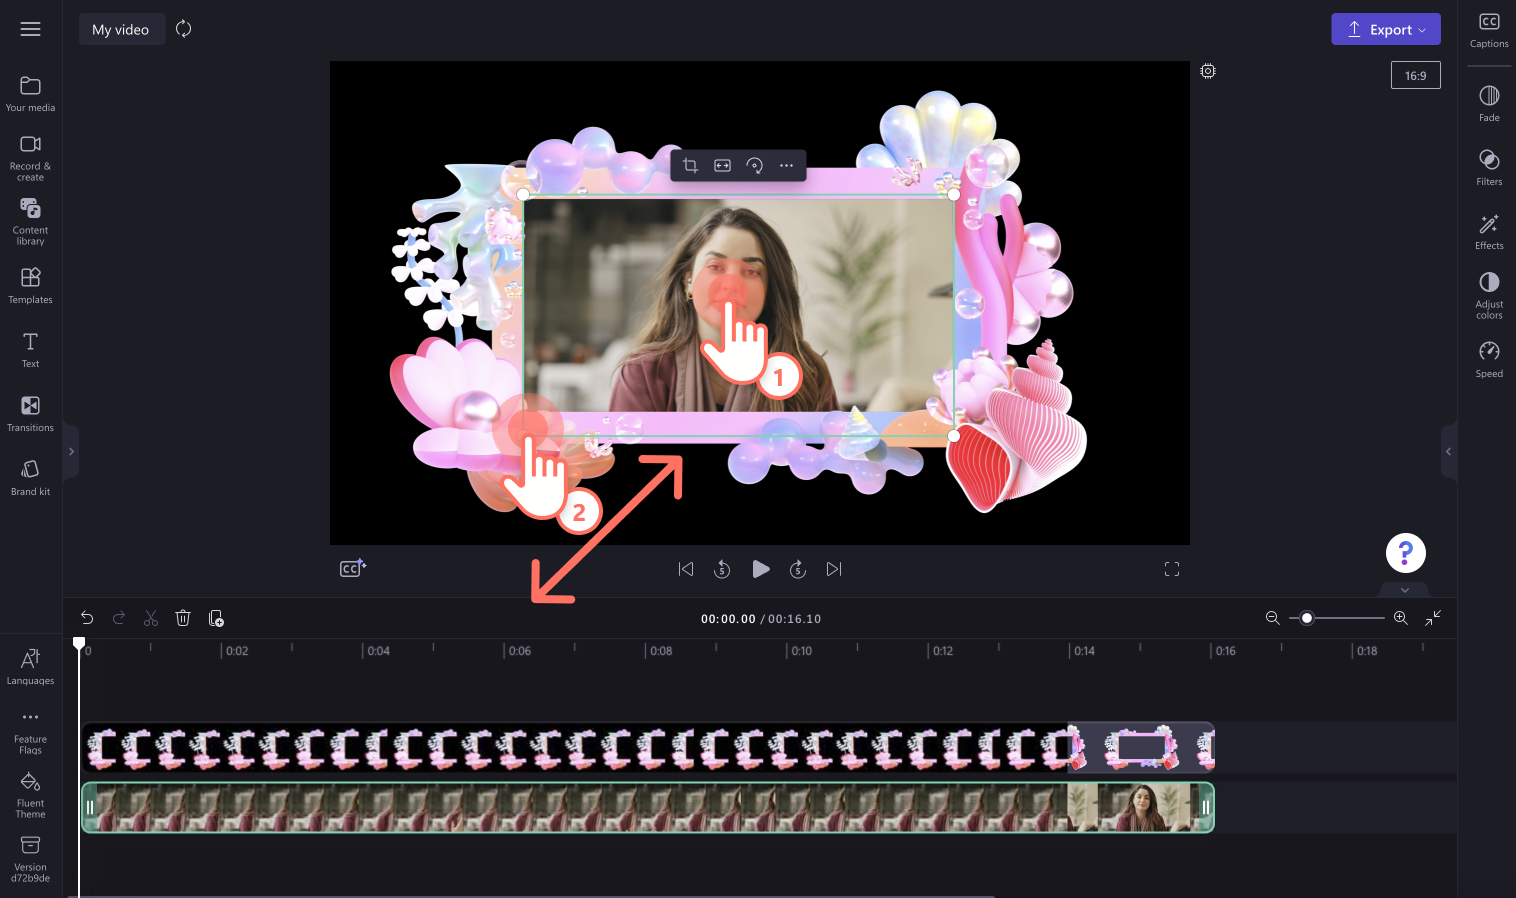 An image of a user editing the video to fit inside the frame.